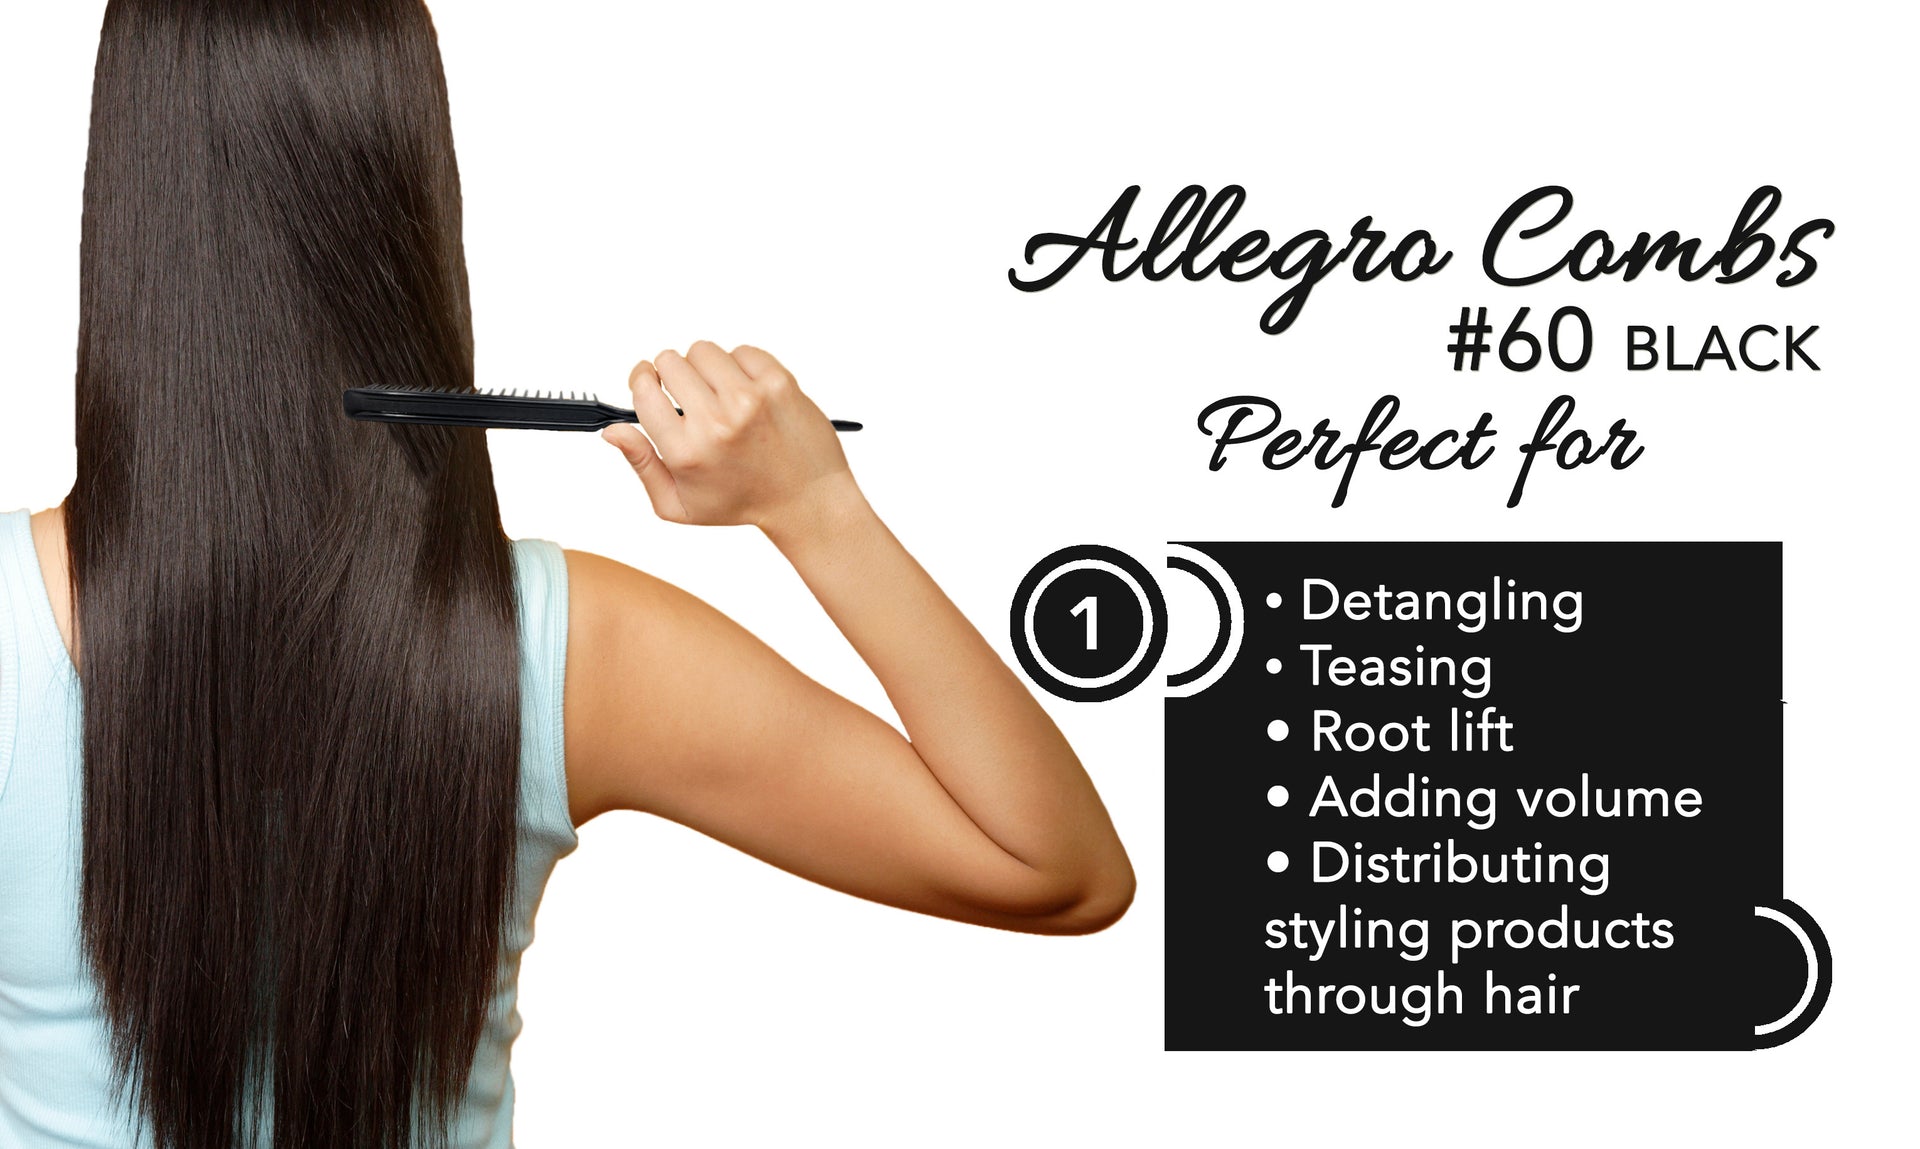 Load video: 3 row combs in multiple colors from Allegro Combs, Made in The USA